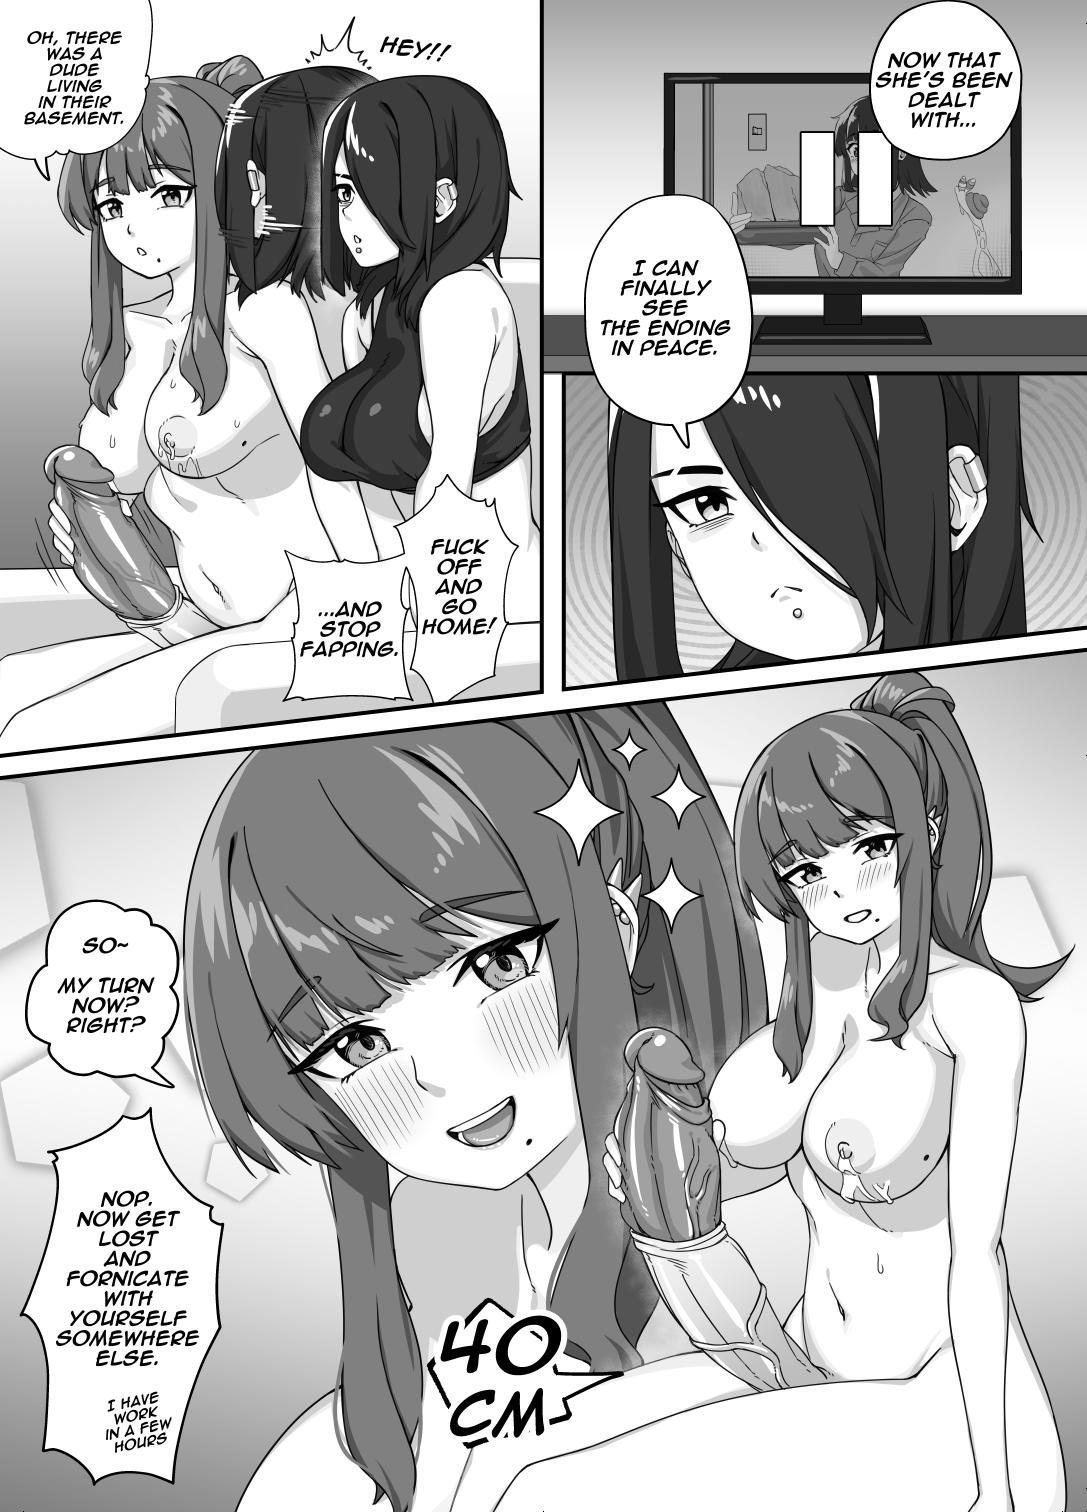 Vibrator Masturbation with a Giant Dick, Let's have fun! - Original Free Rough Porn - Page 29